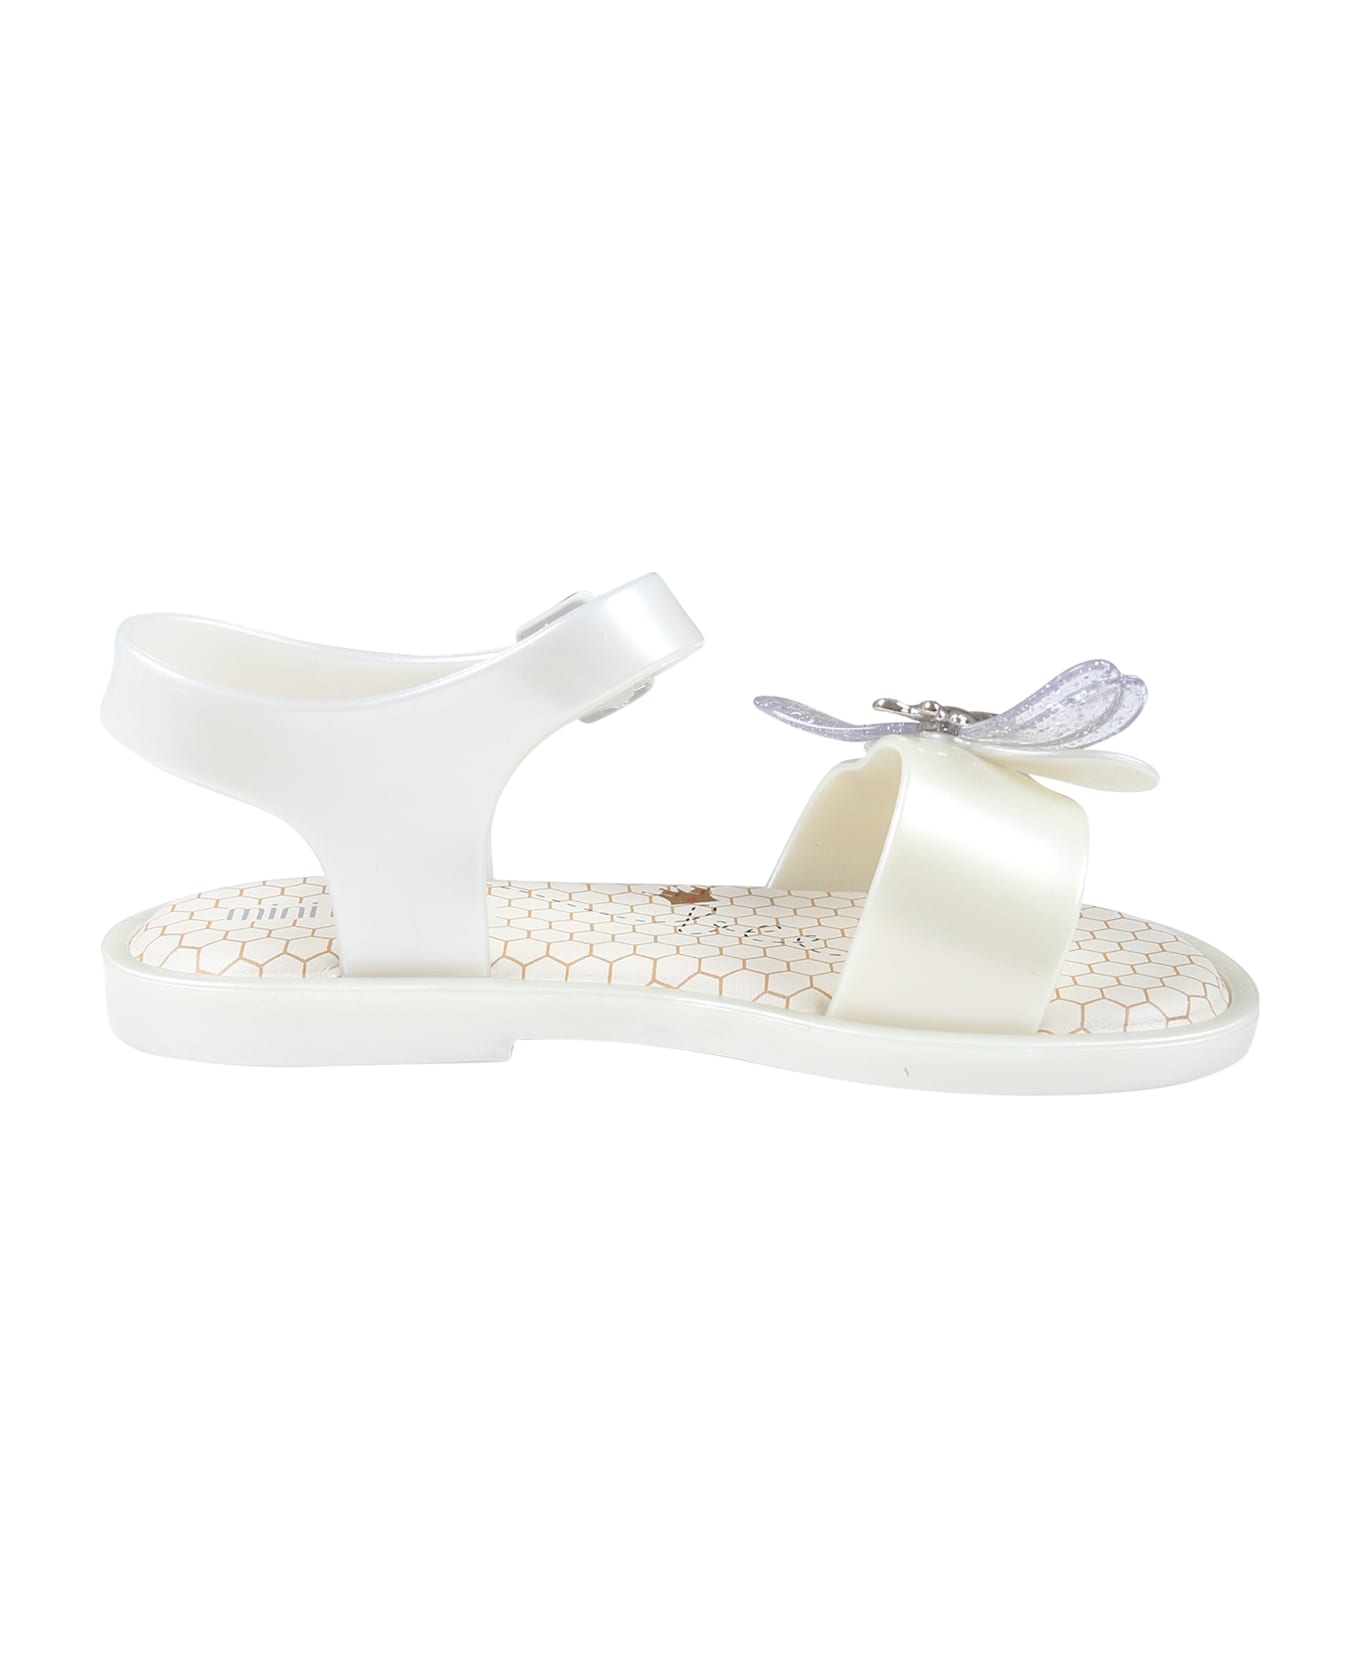 Melissa White Sandals For Girl With Butterfly - White